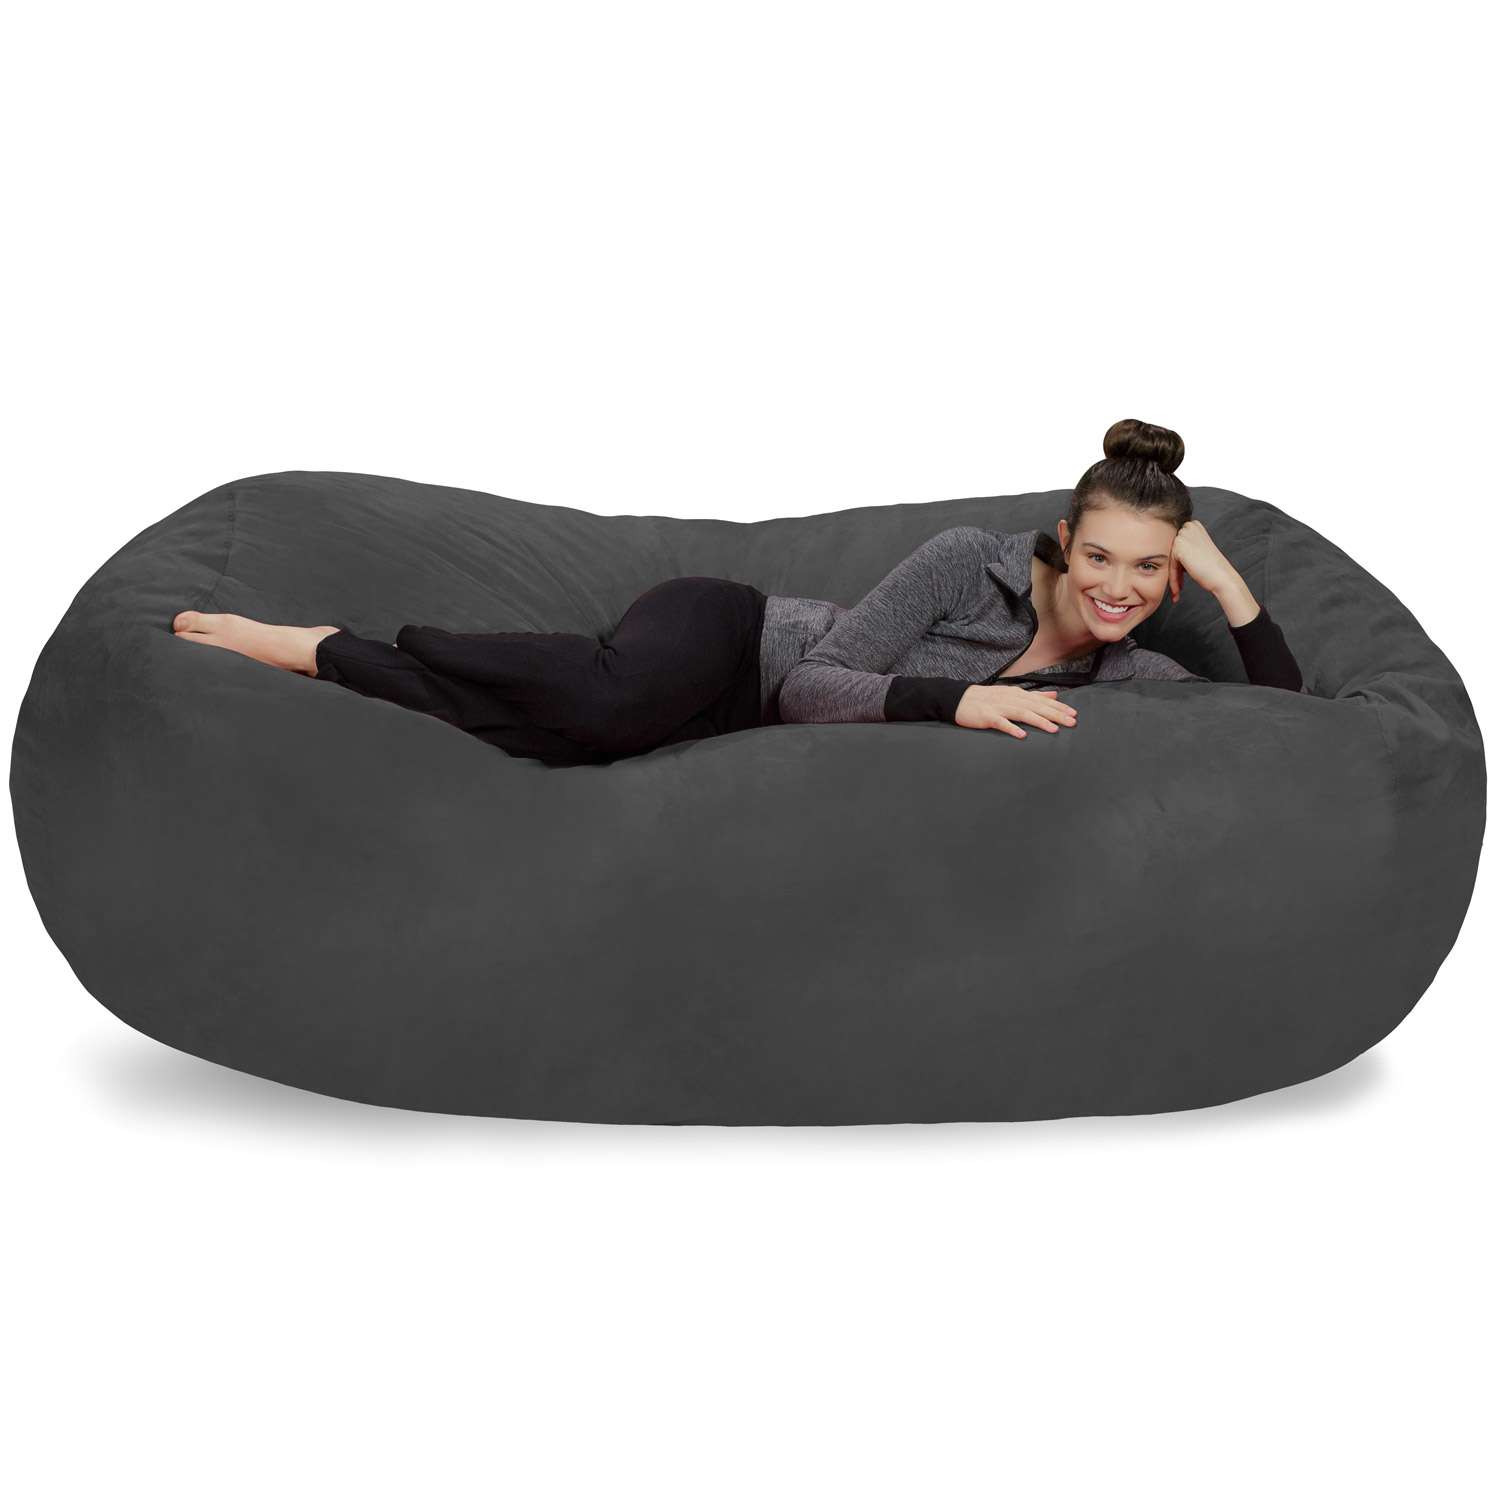 Sofa Sack Bean Bag Chair, Memory Foam Lounger with Microsuede Cover, Kids, Adults, 7.5 ft, Charcoal - image 1 of 4